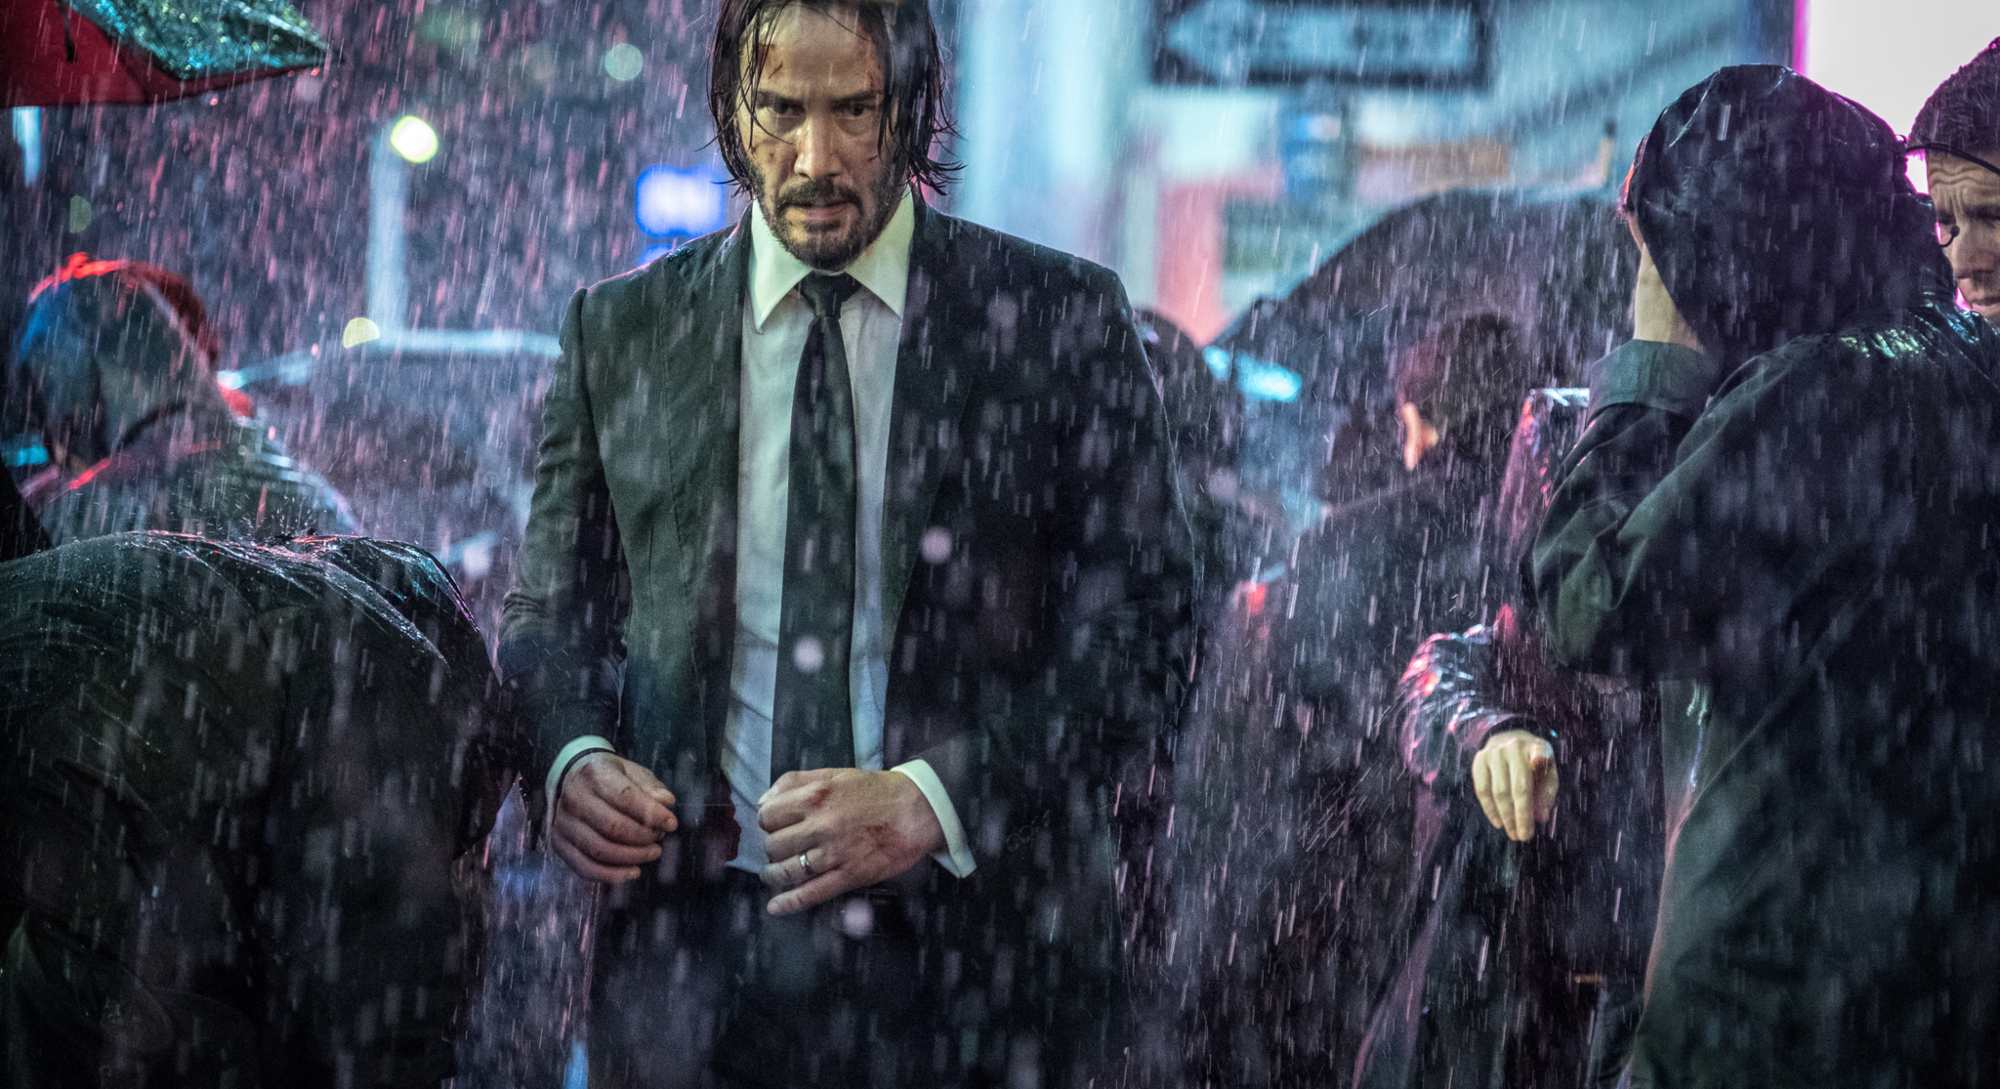 'John Wick_ Chapter 3 – Parabellum' Keanu Reeves as John Wick walking through the rain in a suit in a crowd of people